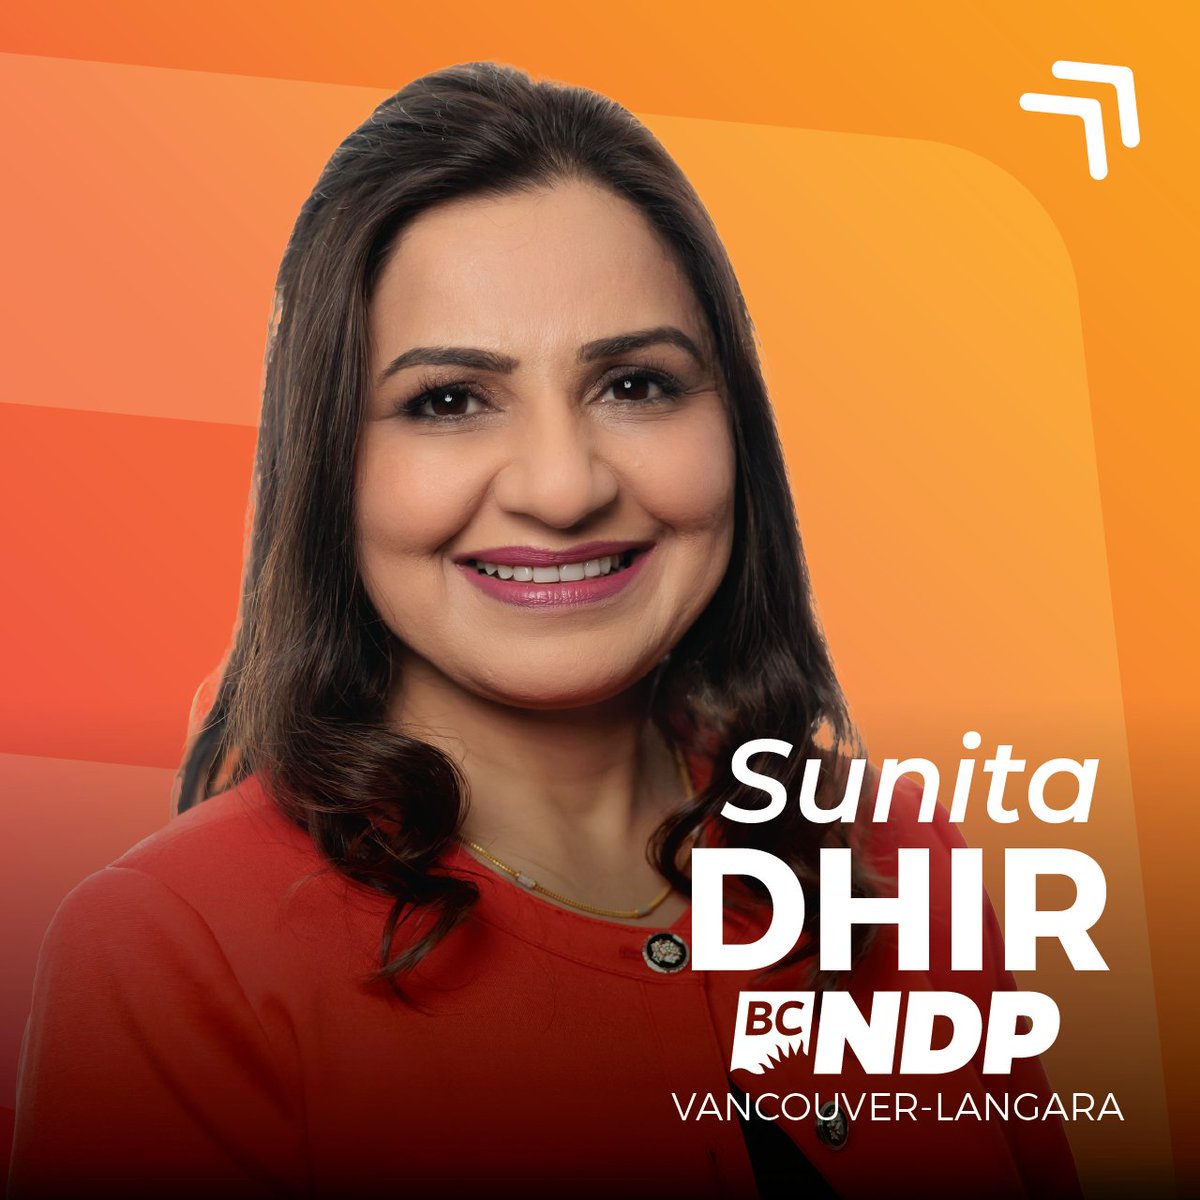 We’re thrilled to announce Sunita Dhir as our BC NDP candidate in Vancouver-Langara. Through her work with SUCCESS, Sunita has helped 100s of people connect to their new communities here in BC. She strongly supports workers’ rights & champions fair & equitable treatment for all.